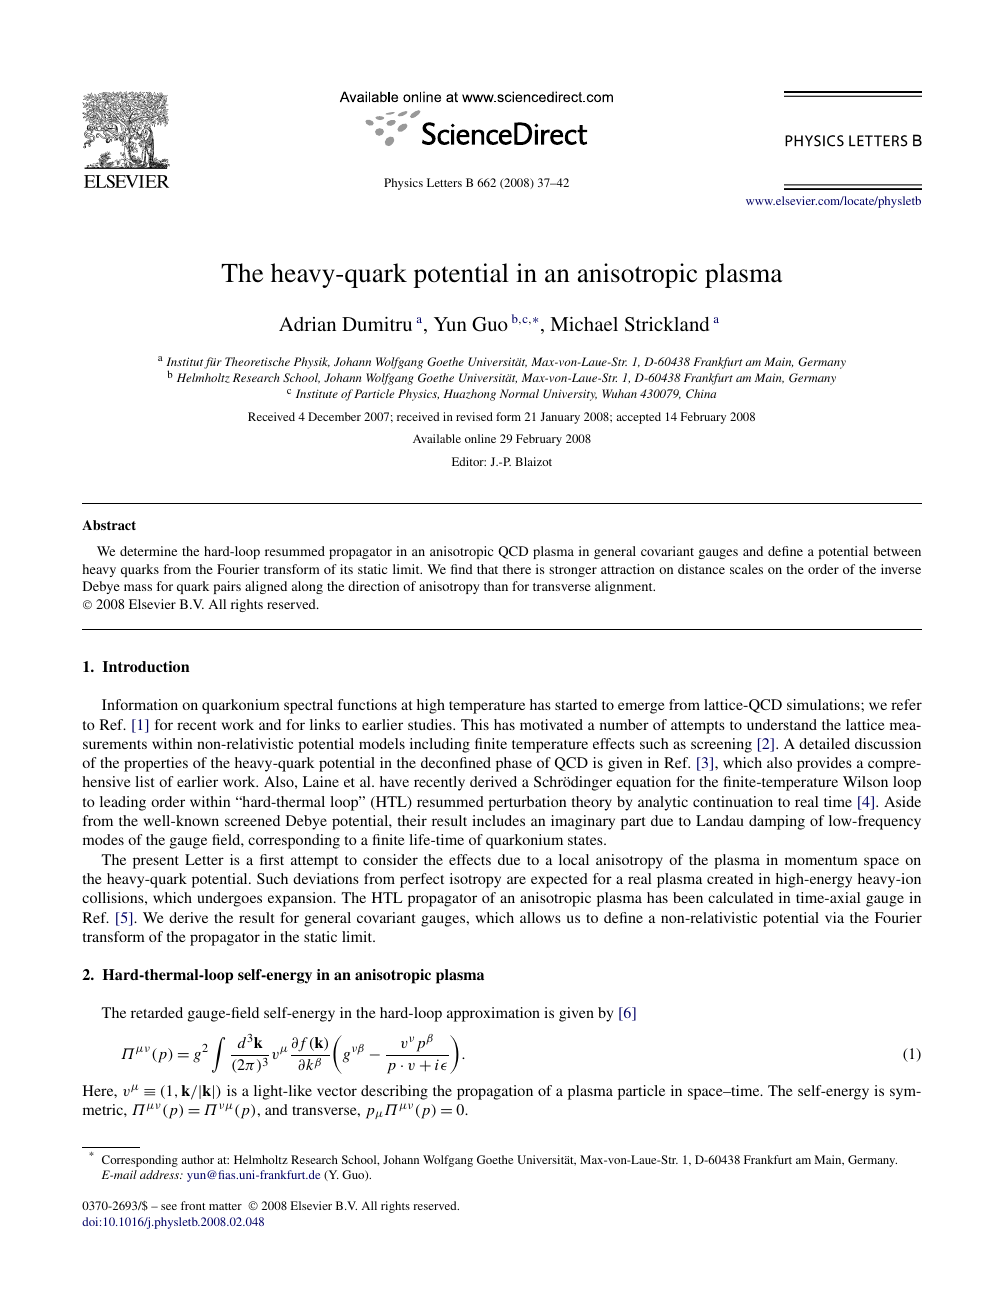 The Heavy Quark Potential In An Anisotropic Plasma Topic Of Research Paper In Physical Sciences Download Scholarly Article Pdf And Read For Free On Cyberleninka Open Science Hub